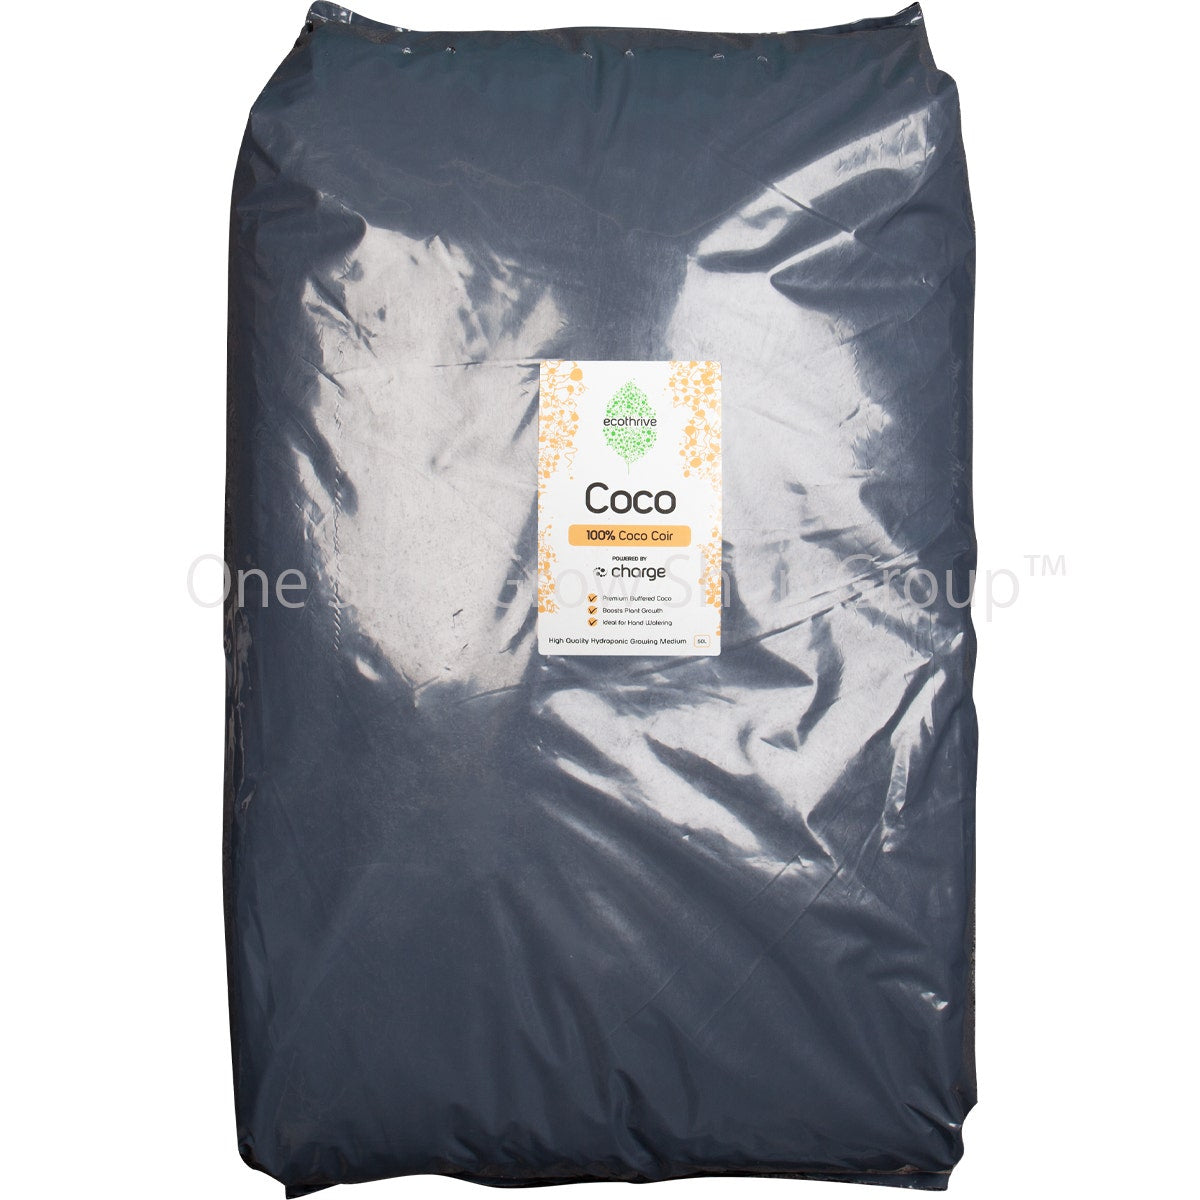 Ecothrive Coco - Pre-Mixed with Charge (1%) 50 Litres